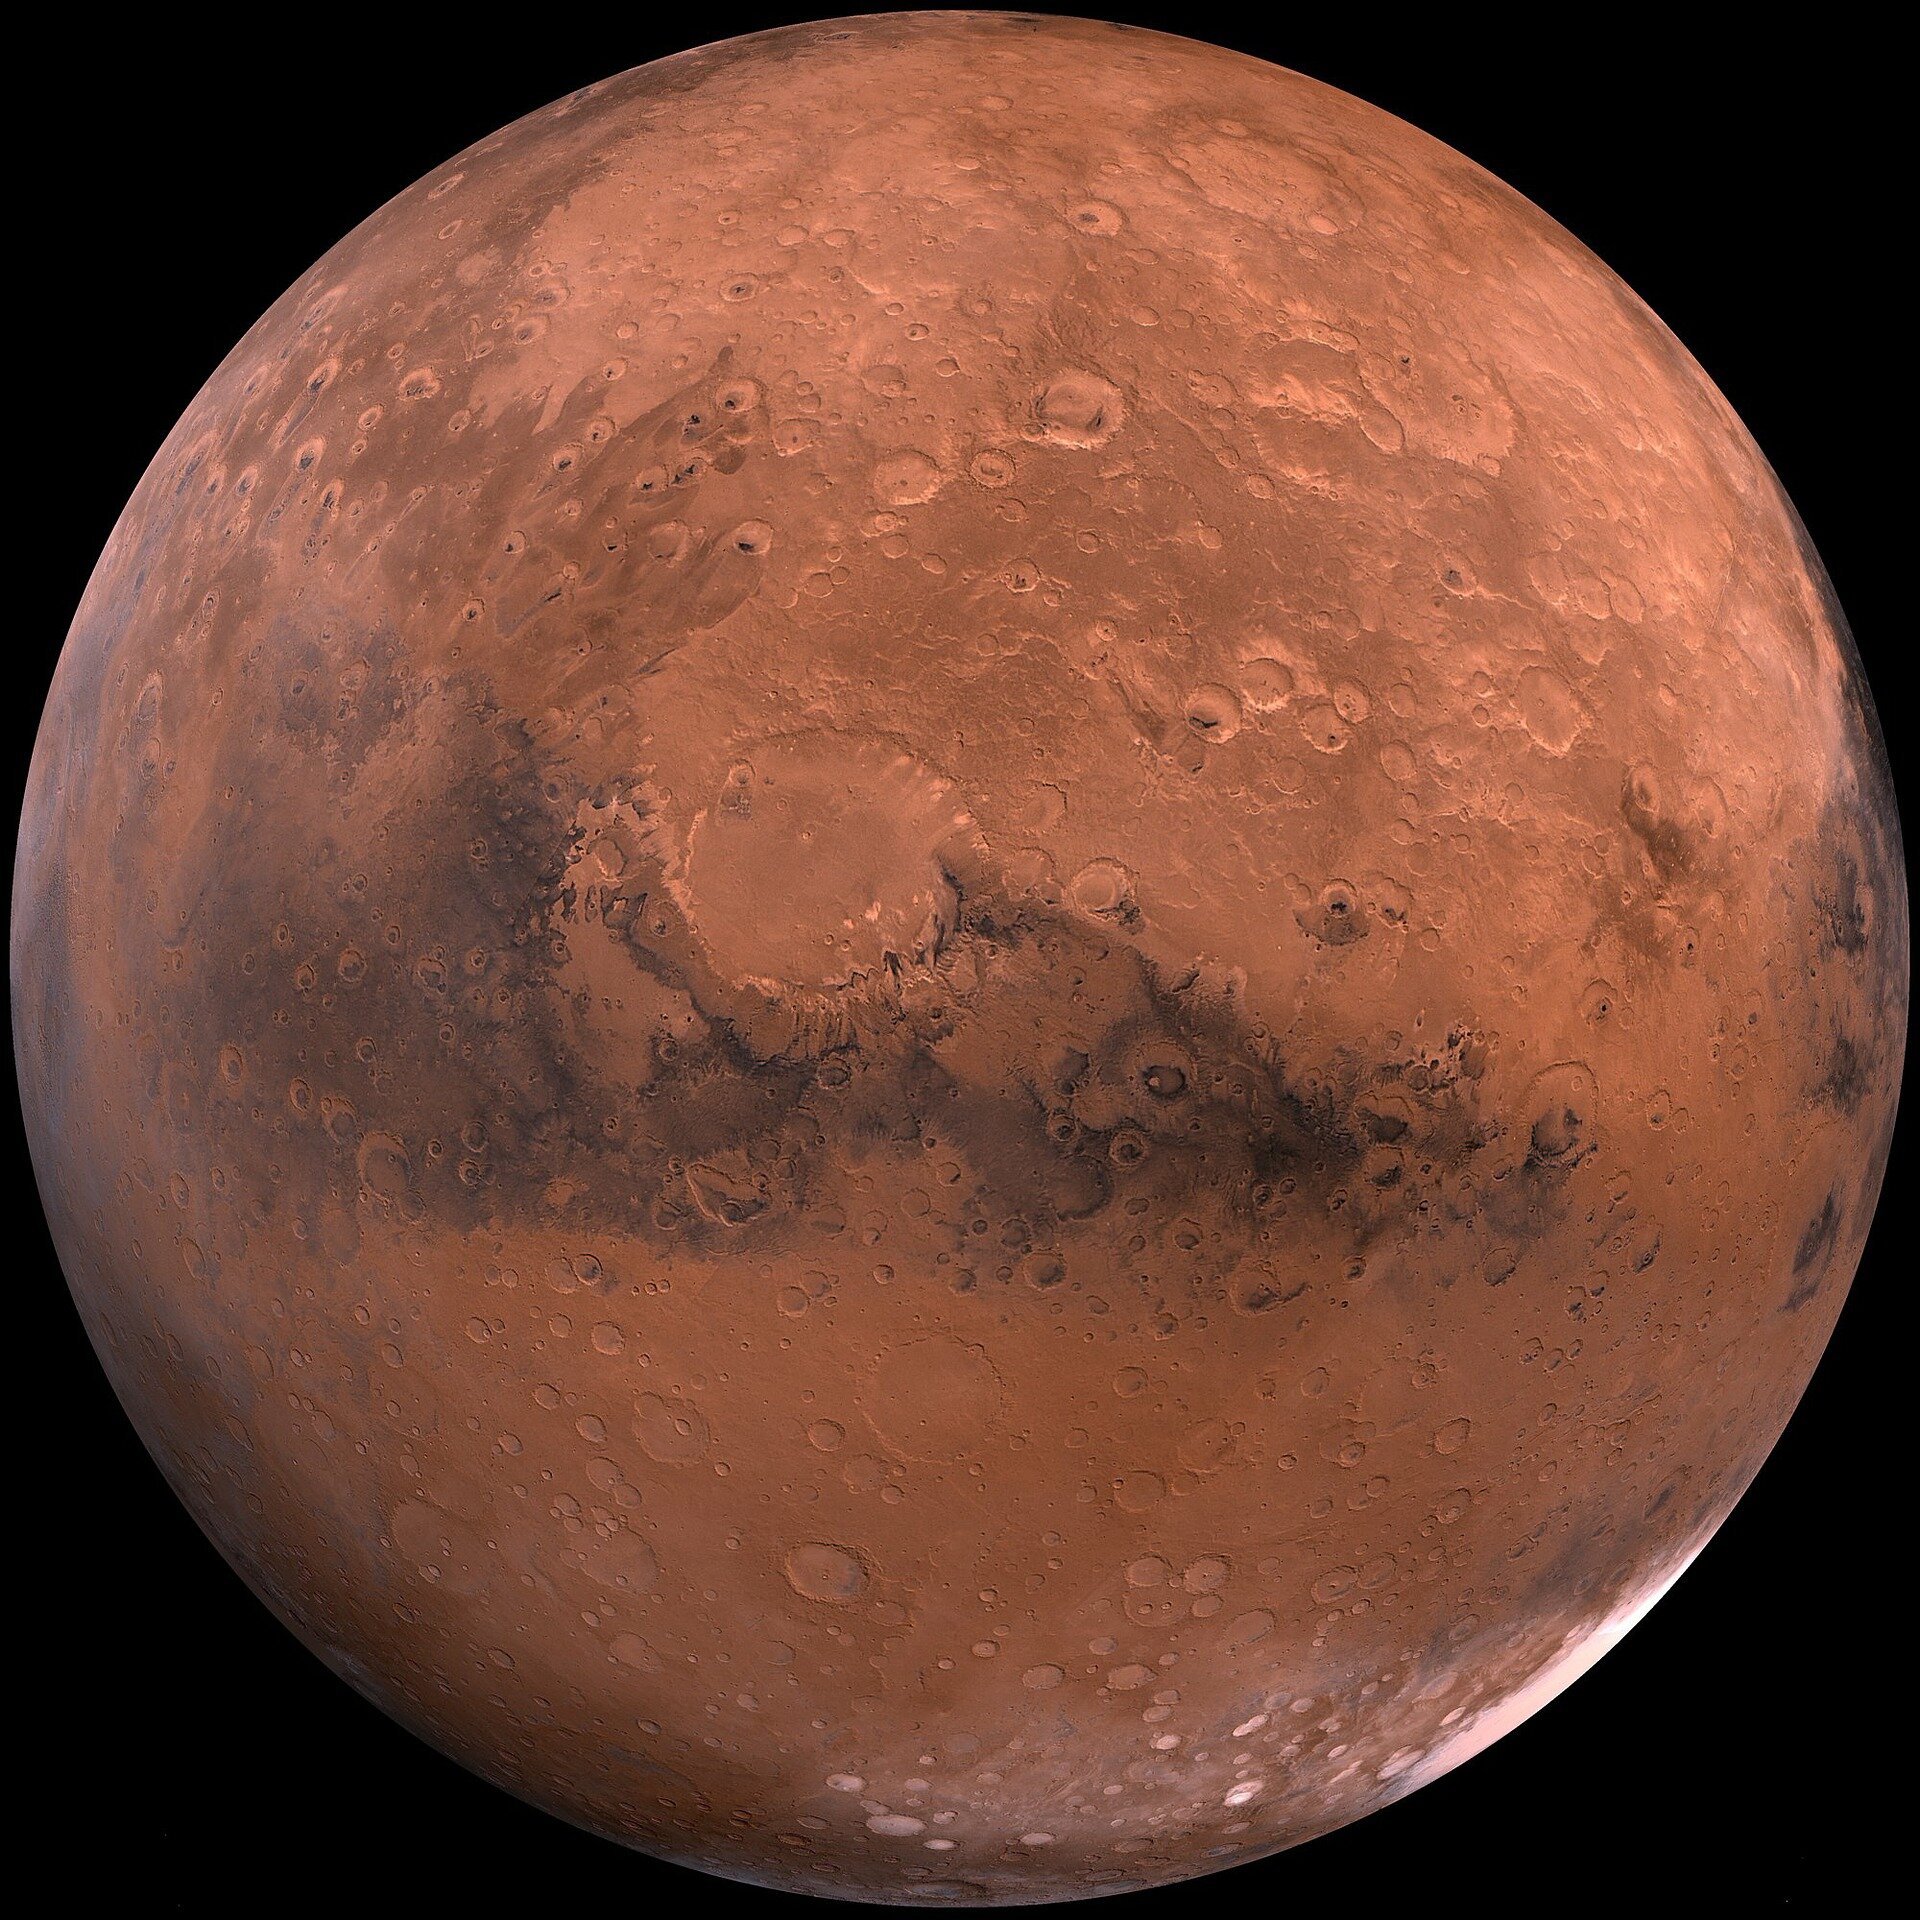 Scientists announce a breakthrough in determining life's origin on Earth—and maybe Mars